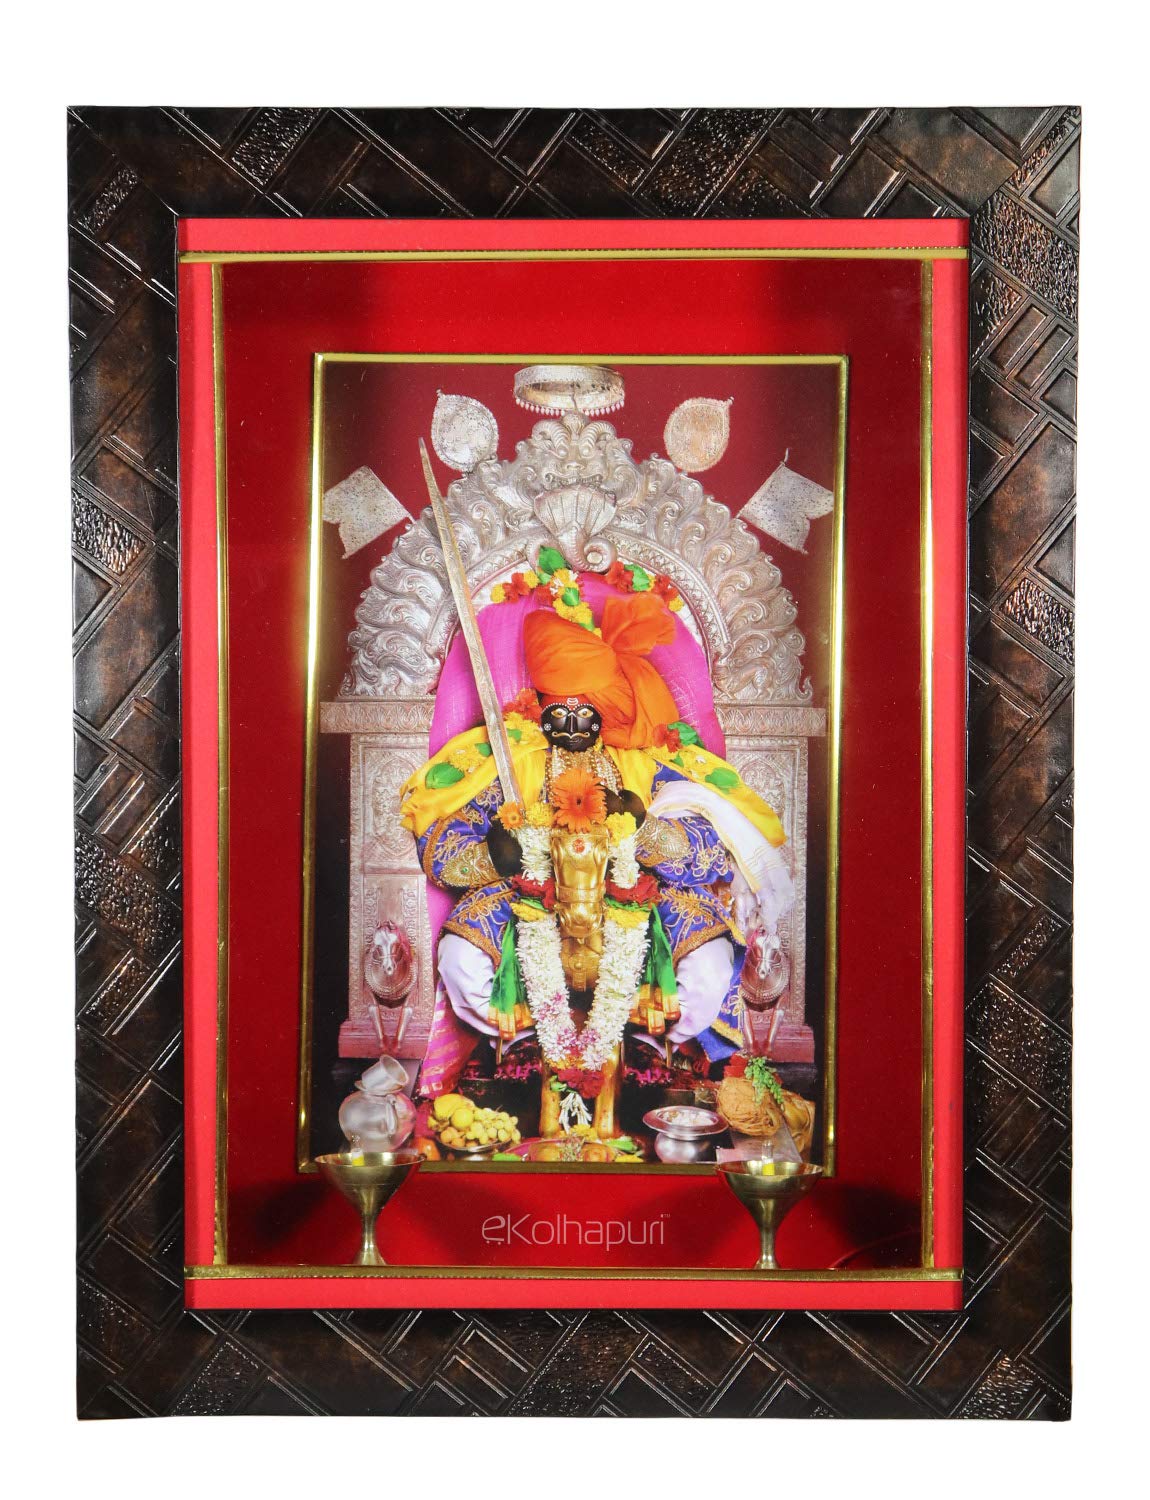 Buy EKolhapuri Handcrafted Gods Idols Wall Hanging Wall Décor Shri Jyotiba Idol, Kolhapur With Light System And Frame Online At Low Prices In India